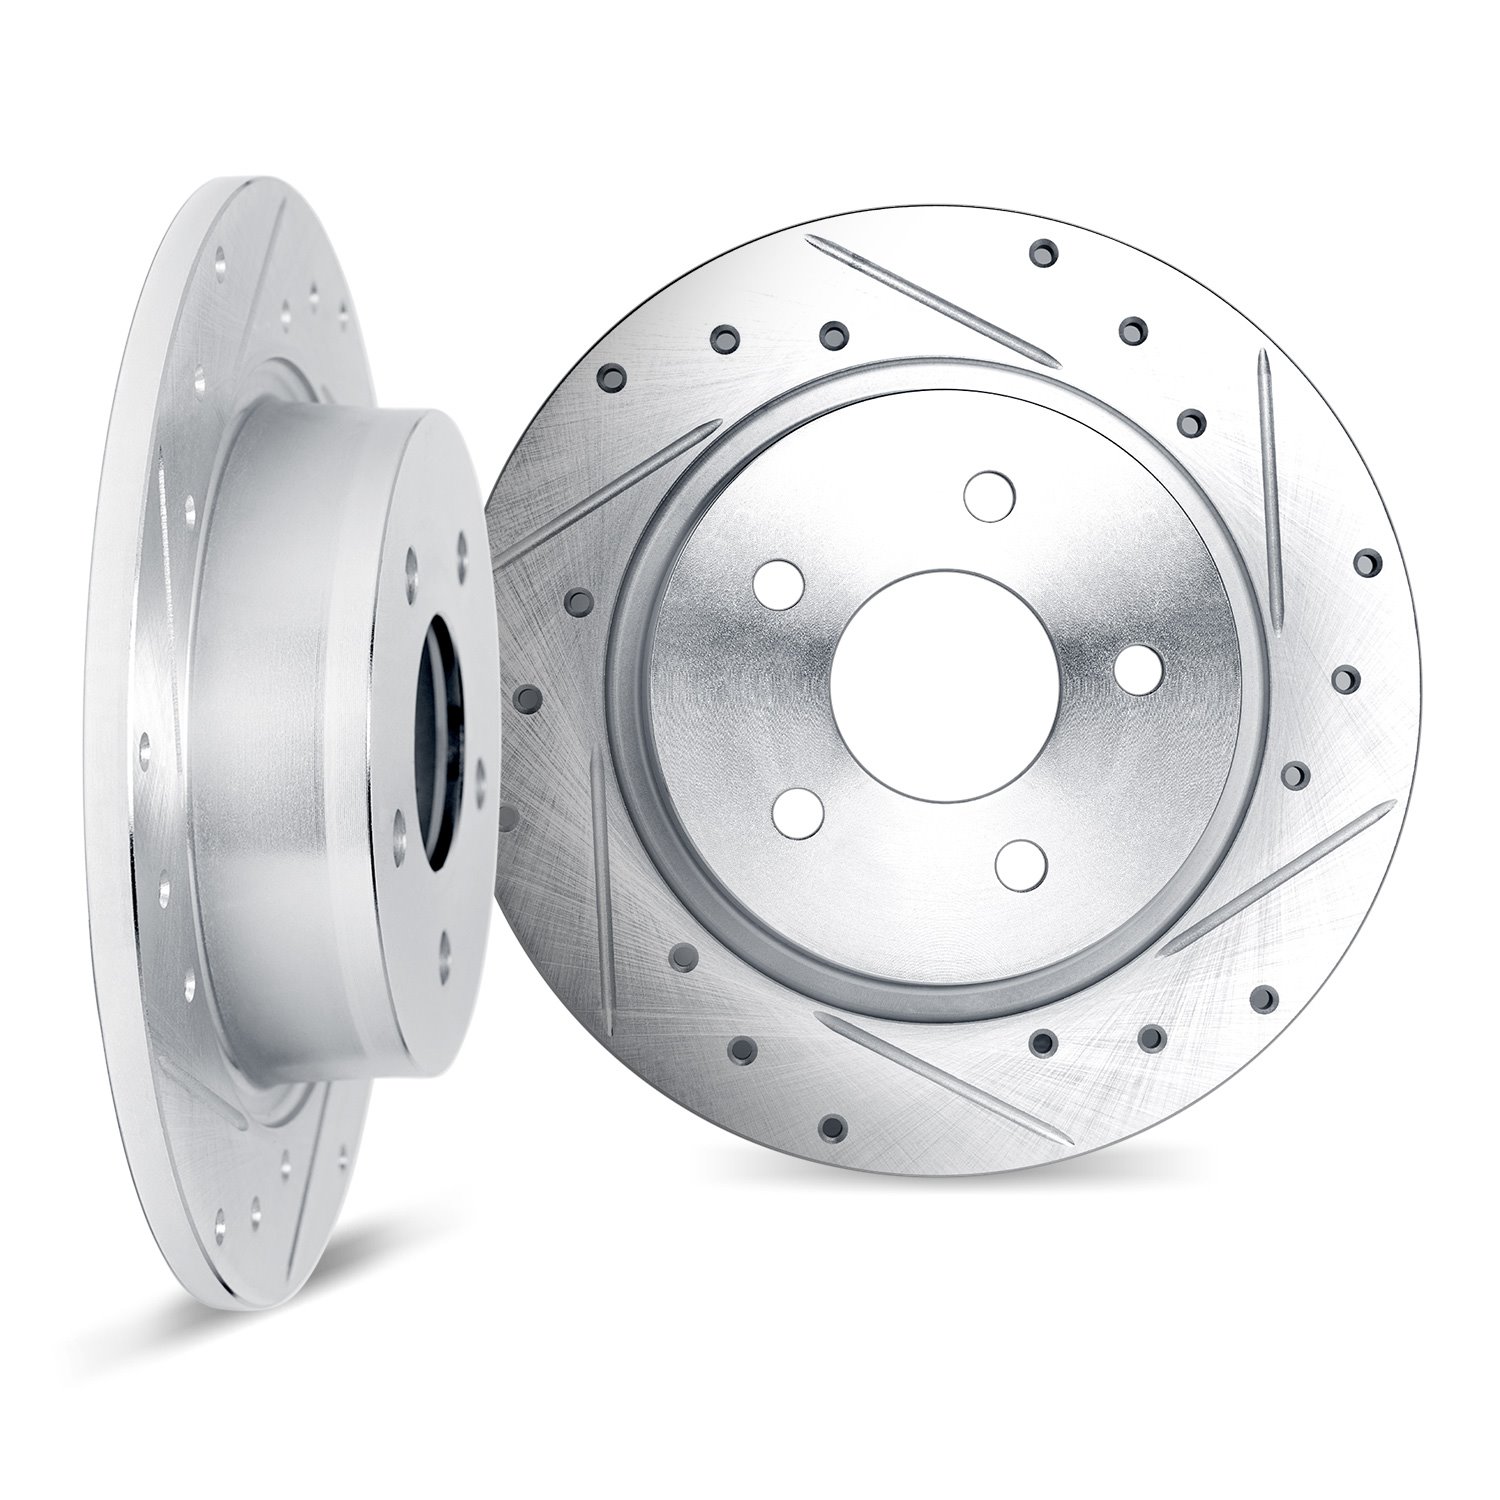 Drilled/Slotted Brake Rotors [Silver], Fits Select